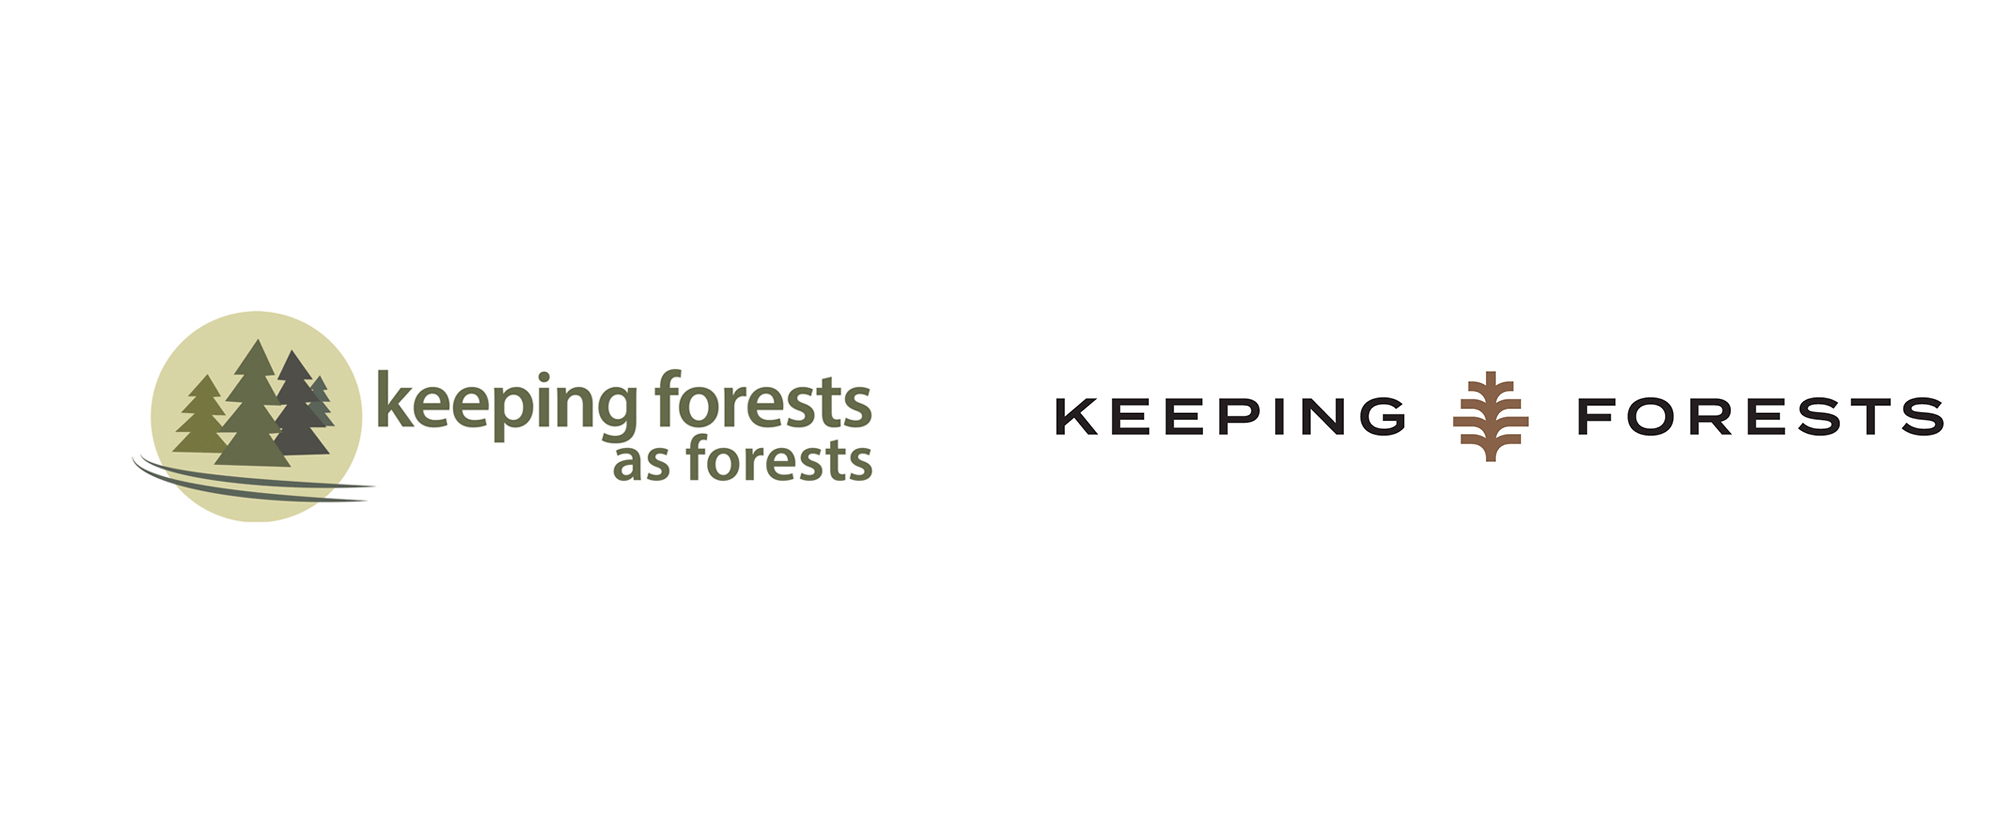 New Logo and Identity for Keeping Forests by Matchstic